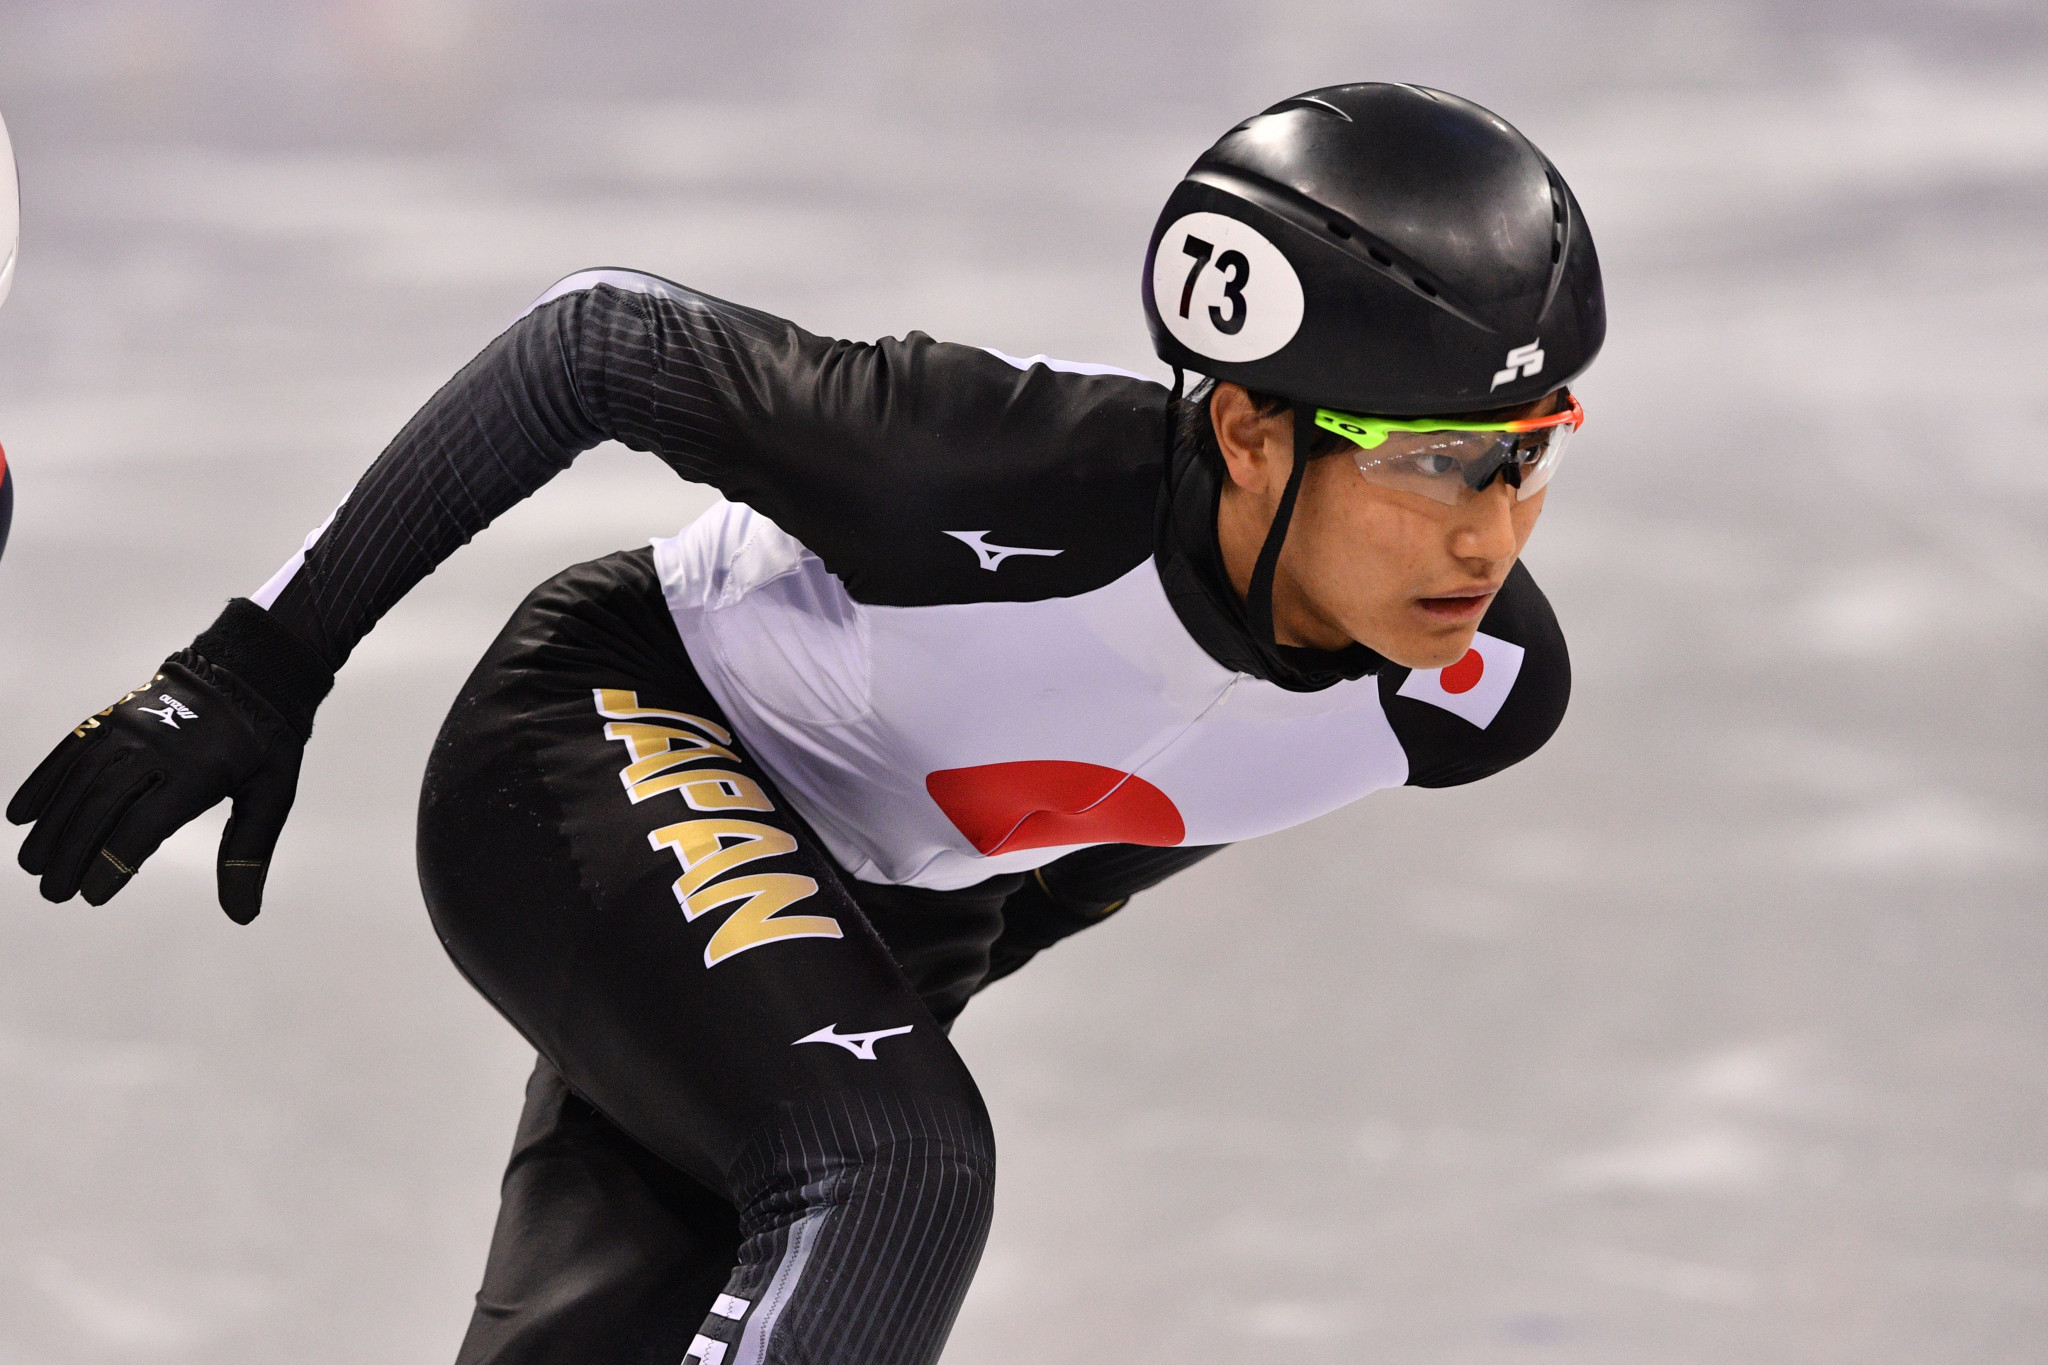 Japan's Kazuki Yoshinaga will be favourite to win the men's ISU World Junior Short Track Speed Skating Championships after securing his first major title this season ©Getty Images